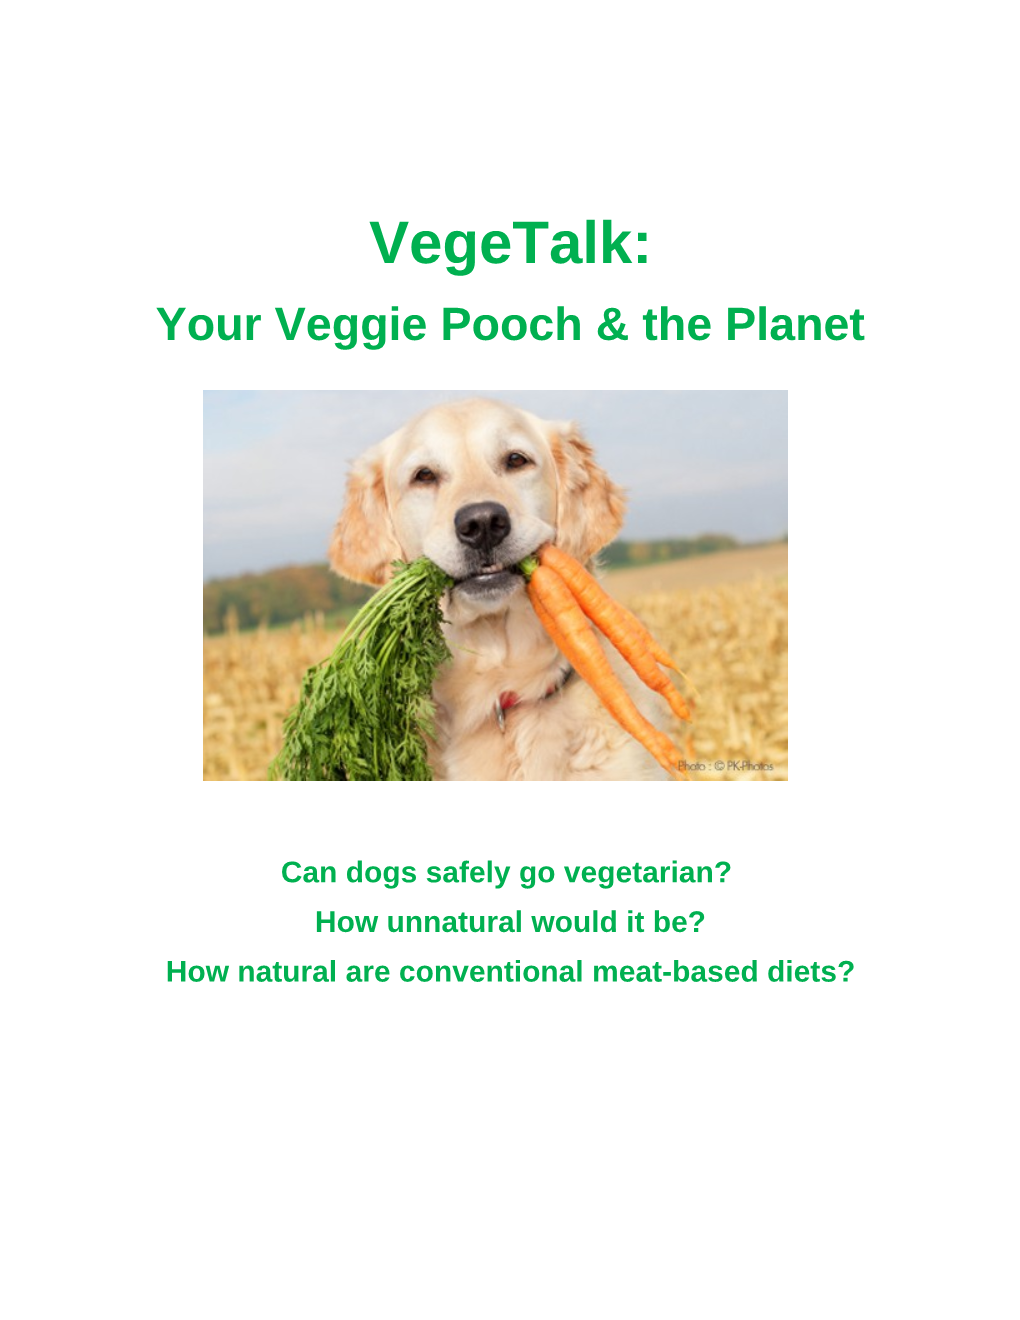 Your Veggie Pooch & the Planet